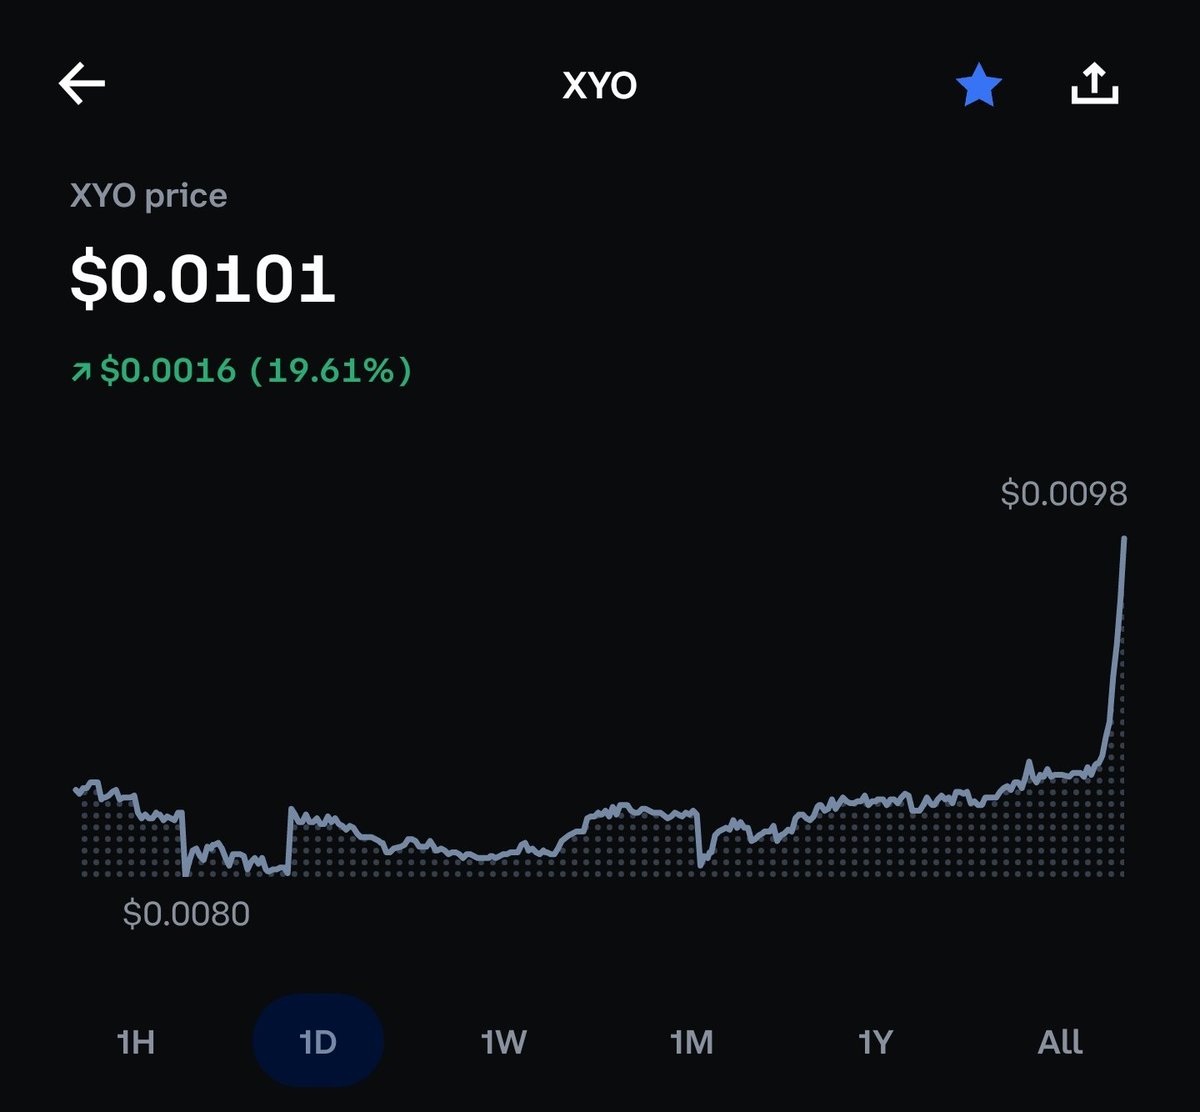 #DontStopBelieving  we did it boys! 🤘🚀🚀🚀
$xyo #officialxyo #1000x